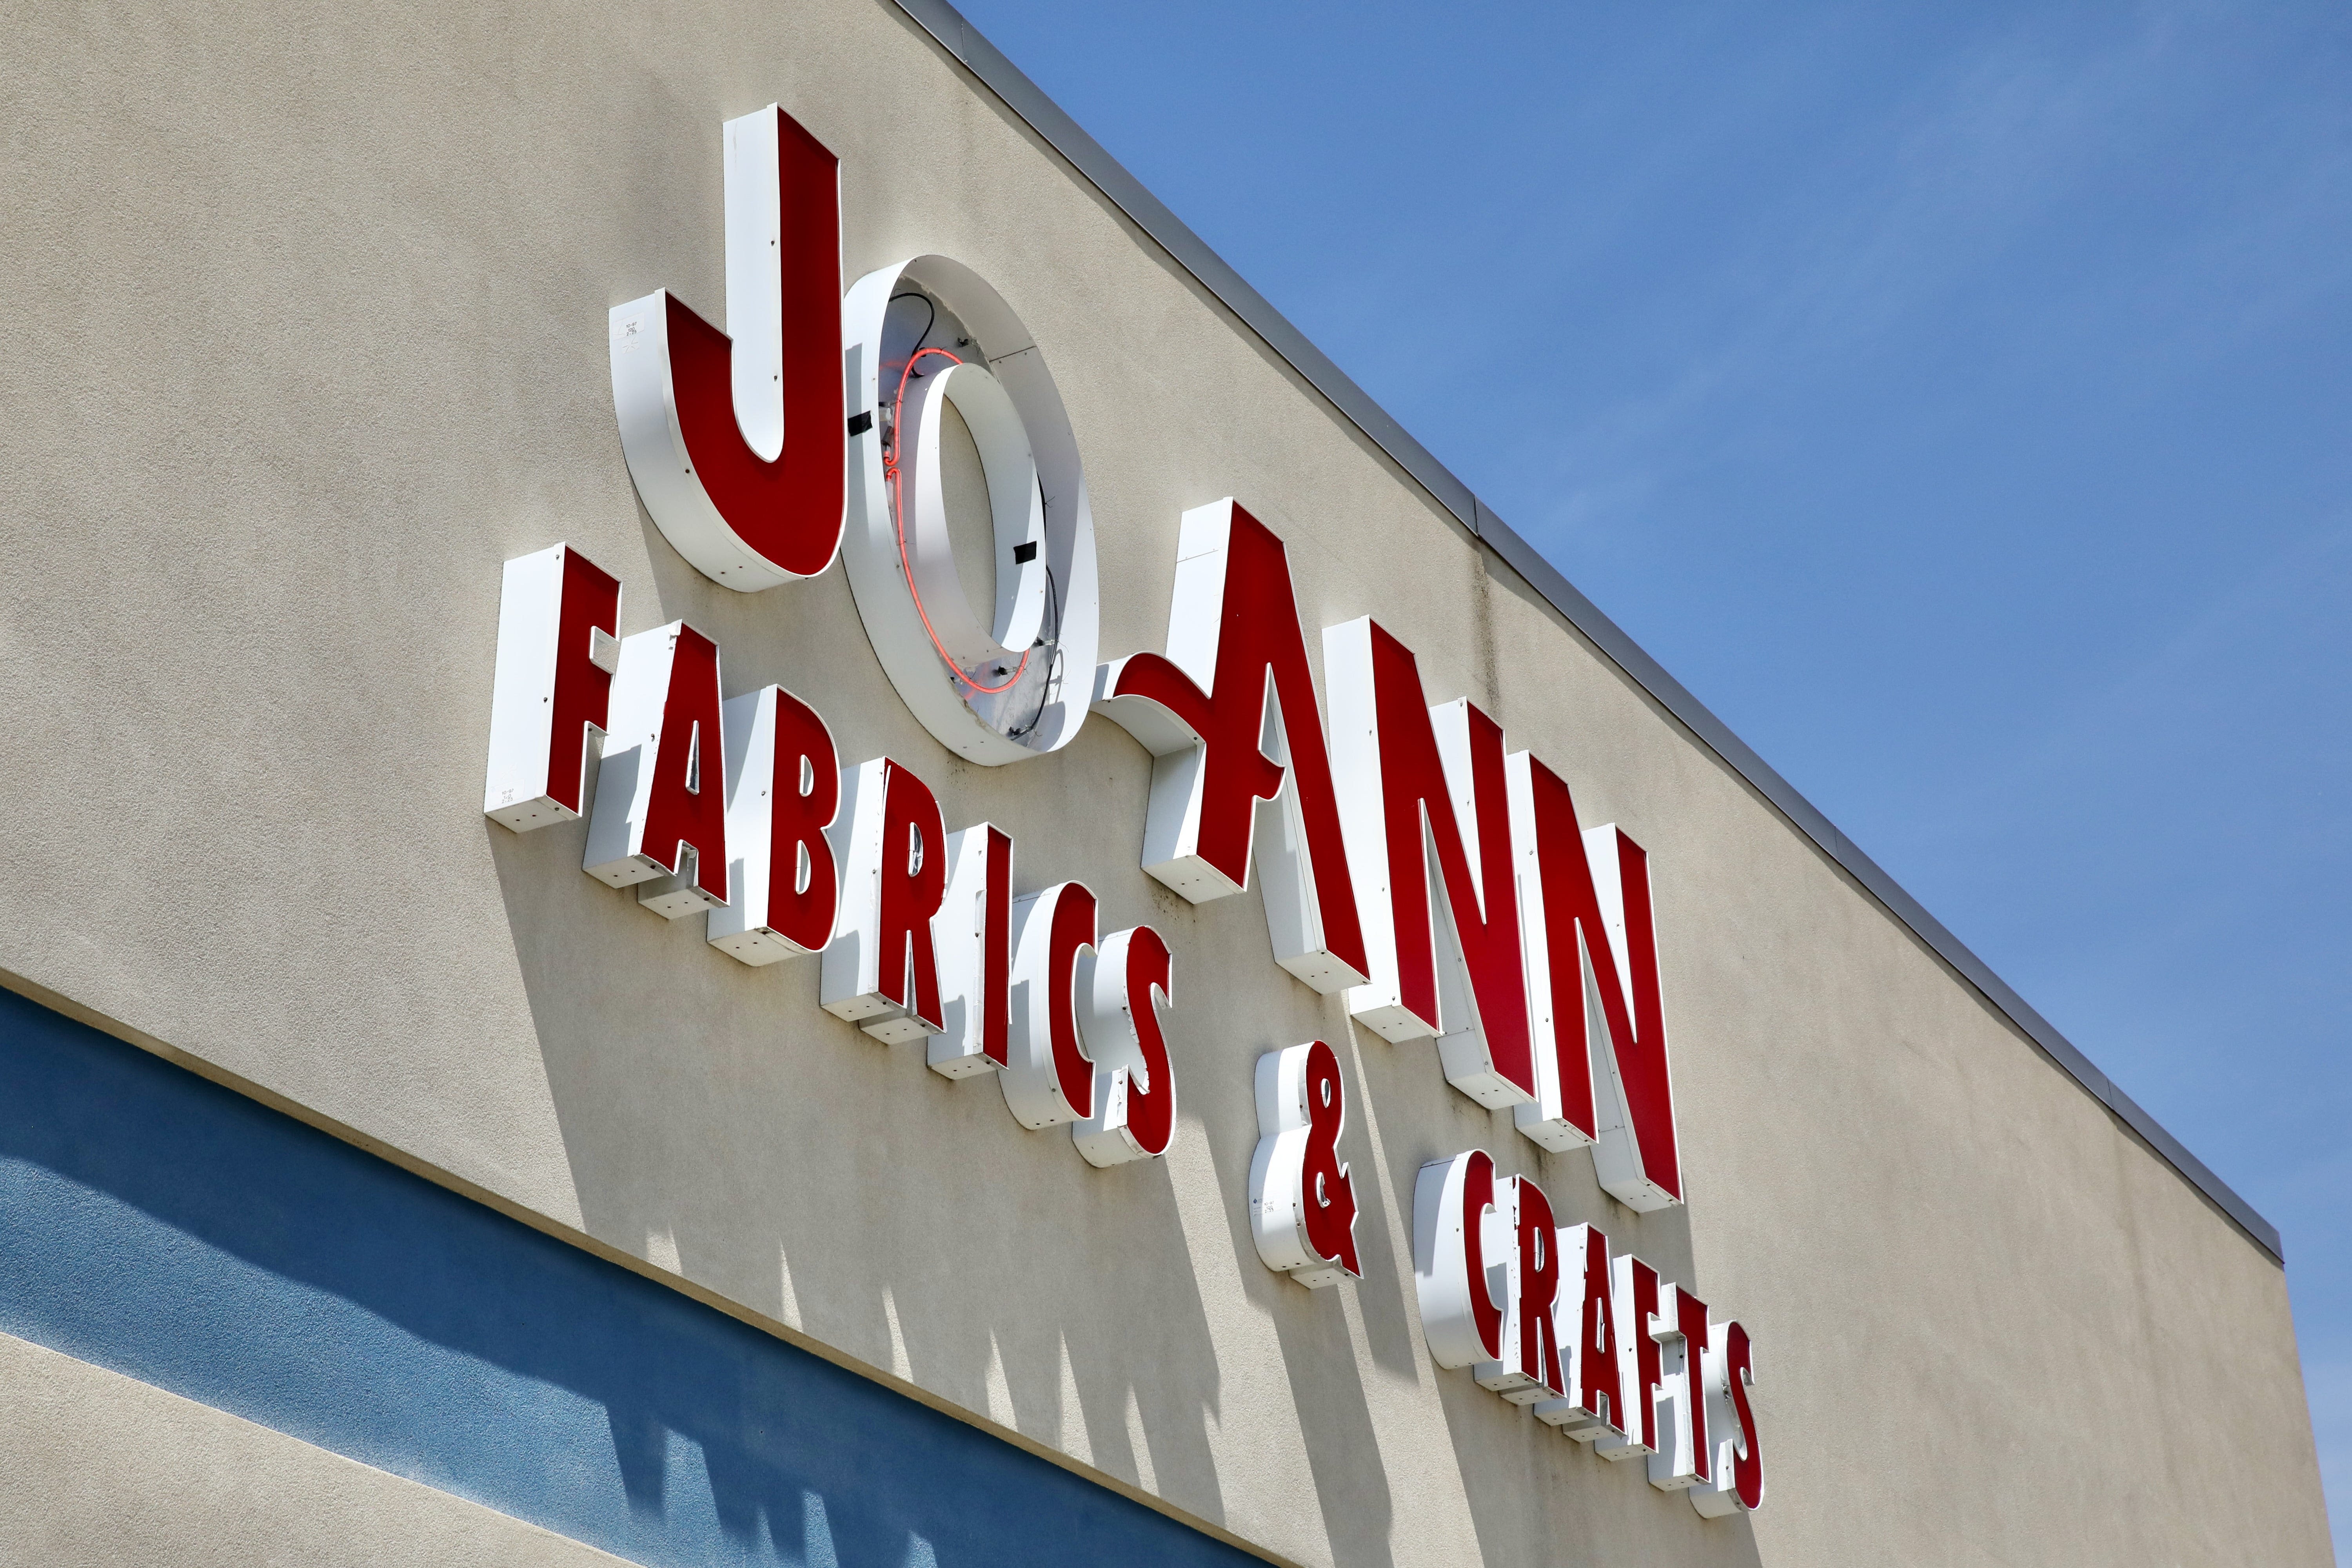 Joann fabrics and crafts emerges from bankruptcy, with NJ stores to stay open